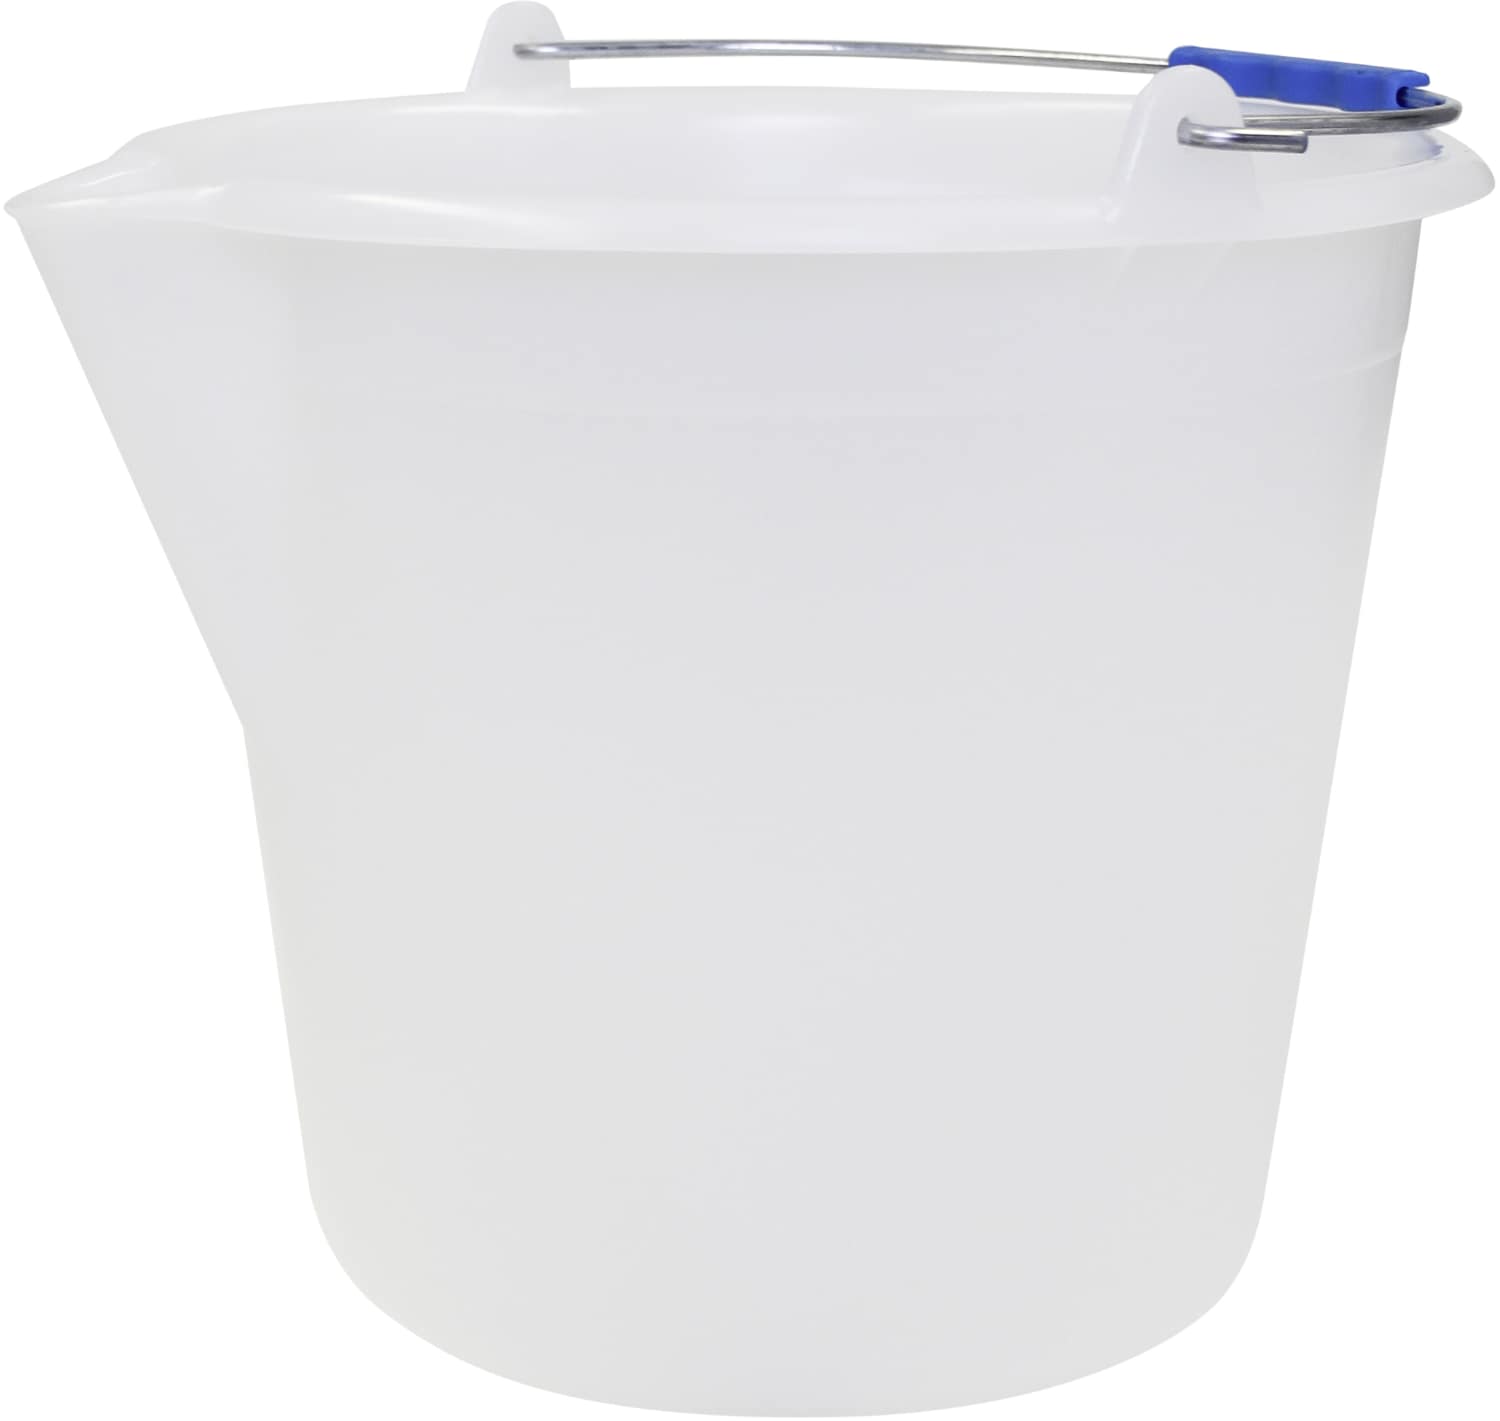 Bucket with spout and metal handle